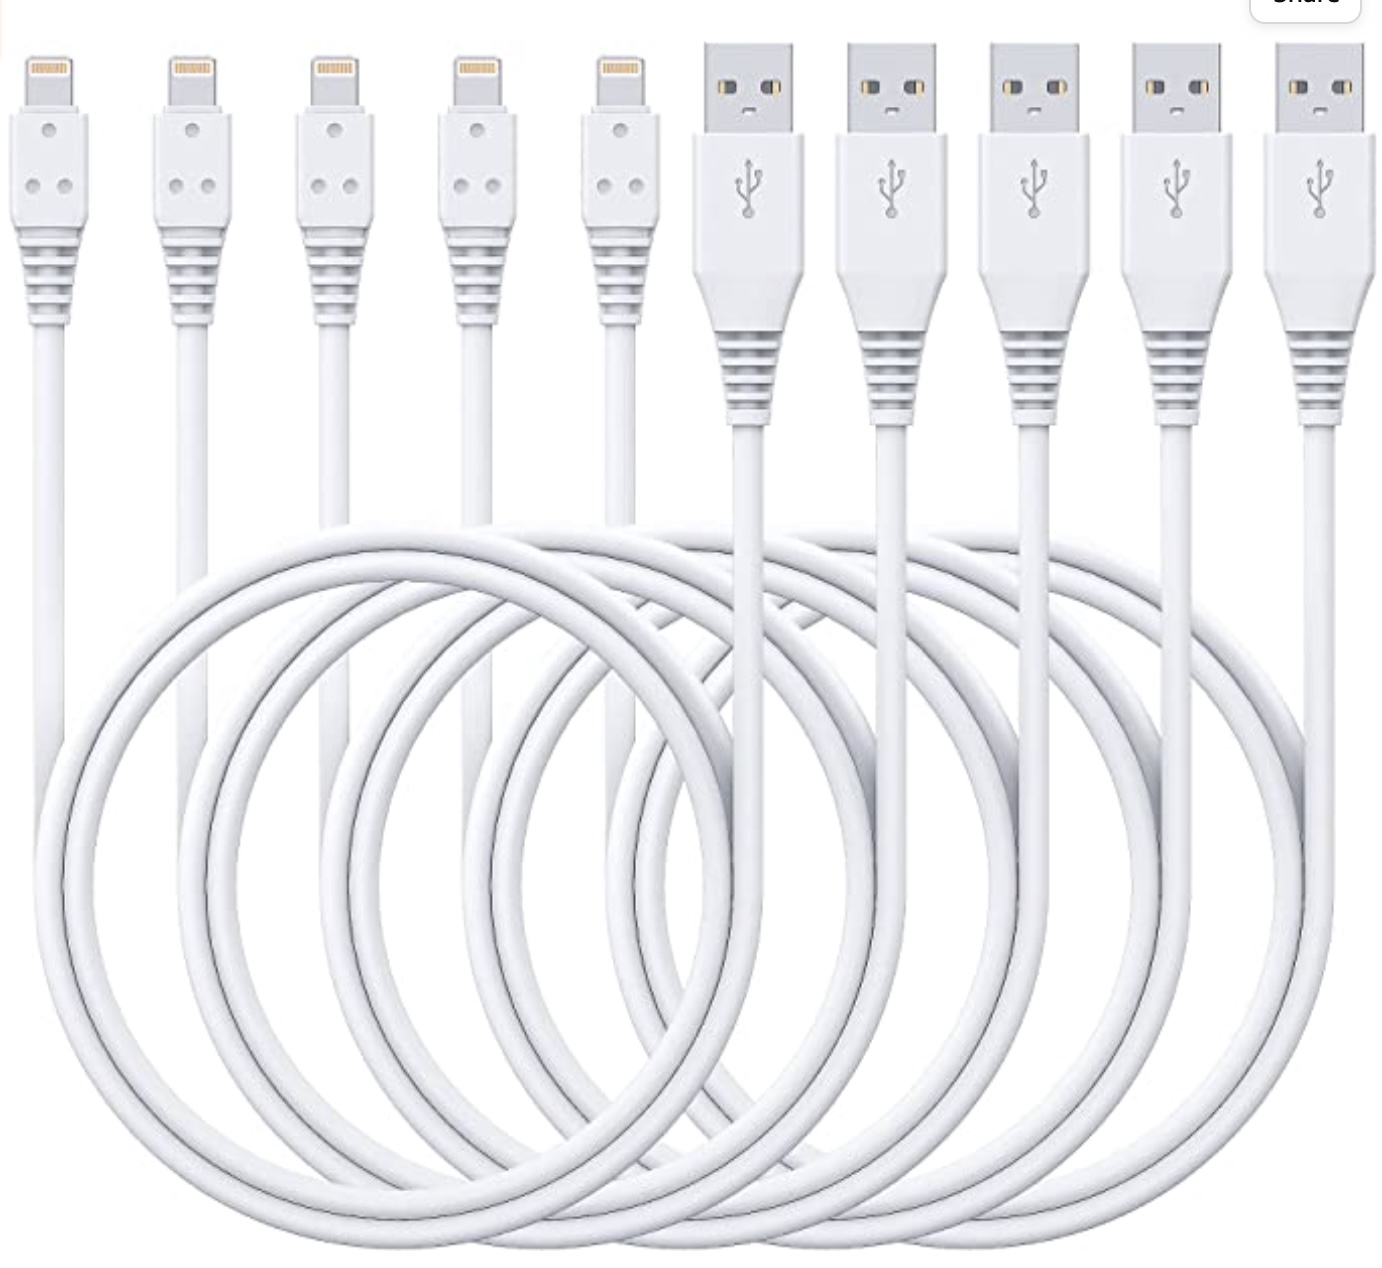 5-Pack MFi Certified iPhone Charging Cable 3ft, 6ft, or 10ft - Amazon Prime - Starting at $5.99